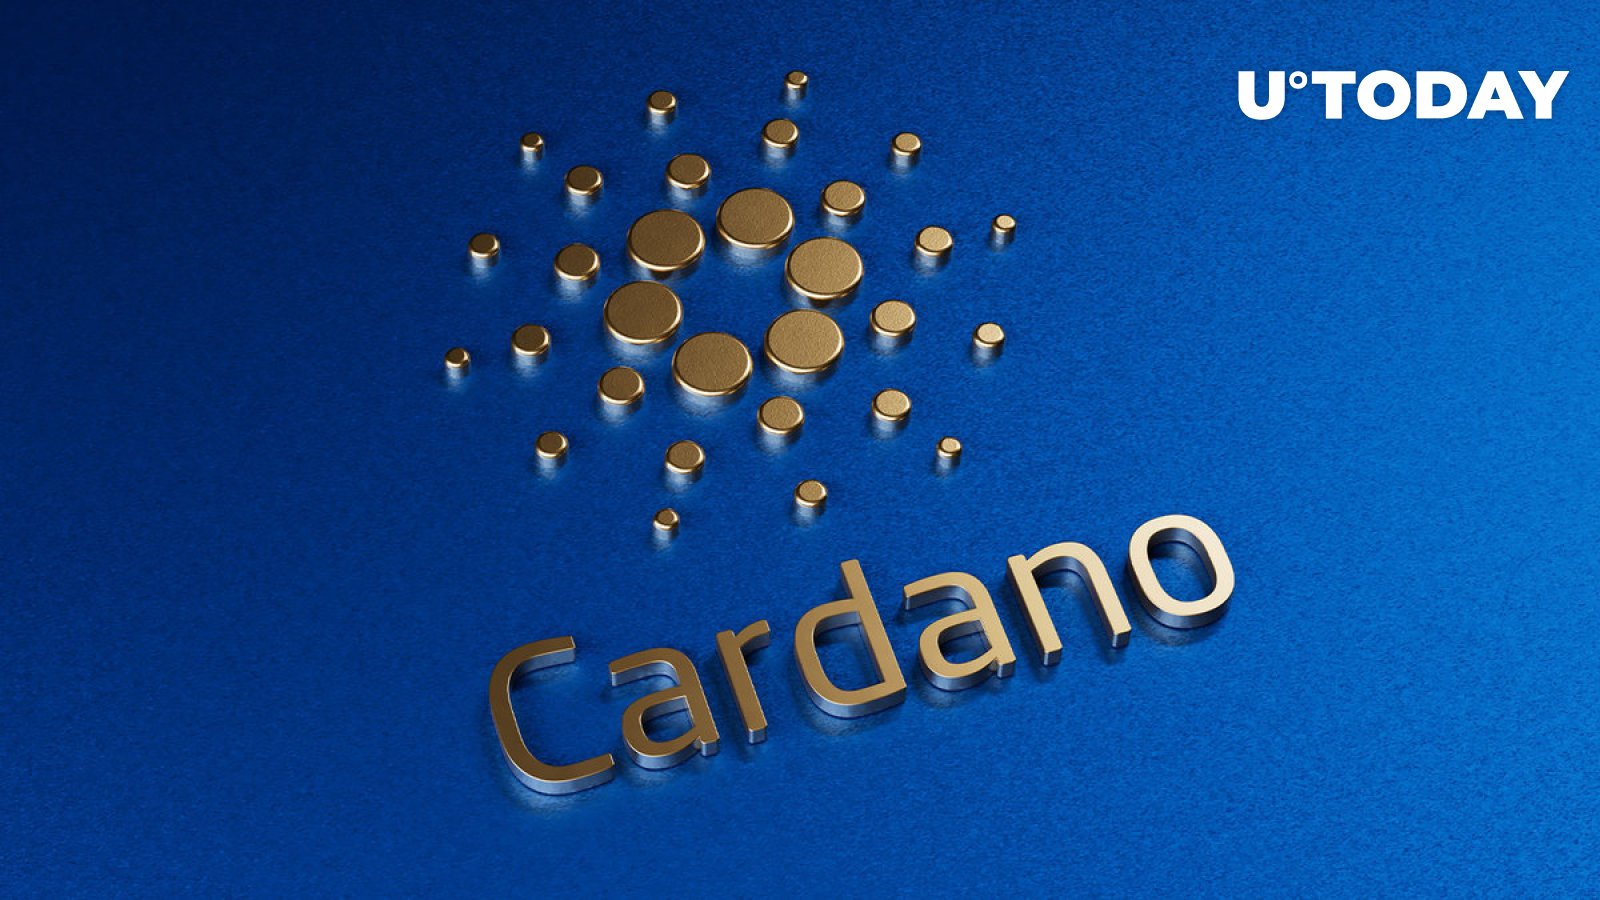 Cardano’s Stablecoin Djed to Go Live in January 2023